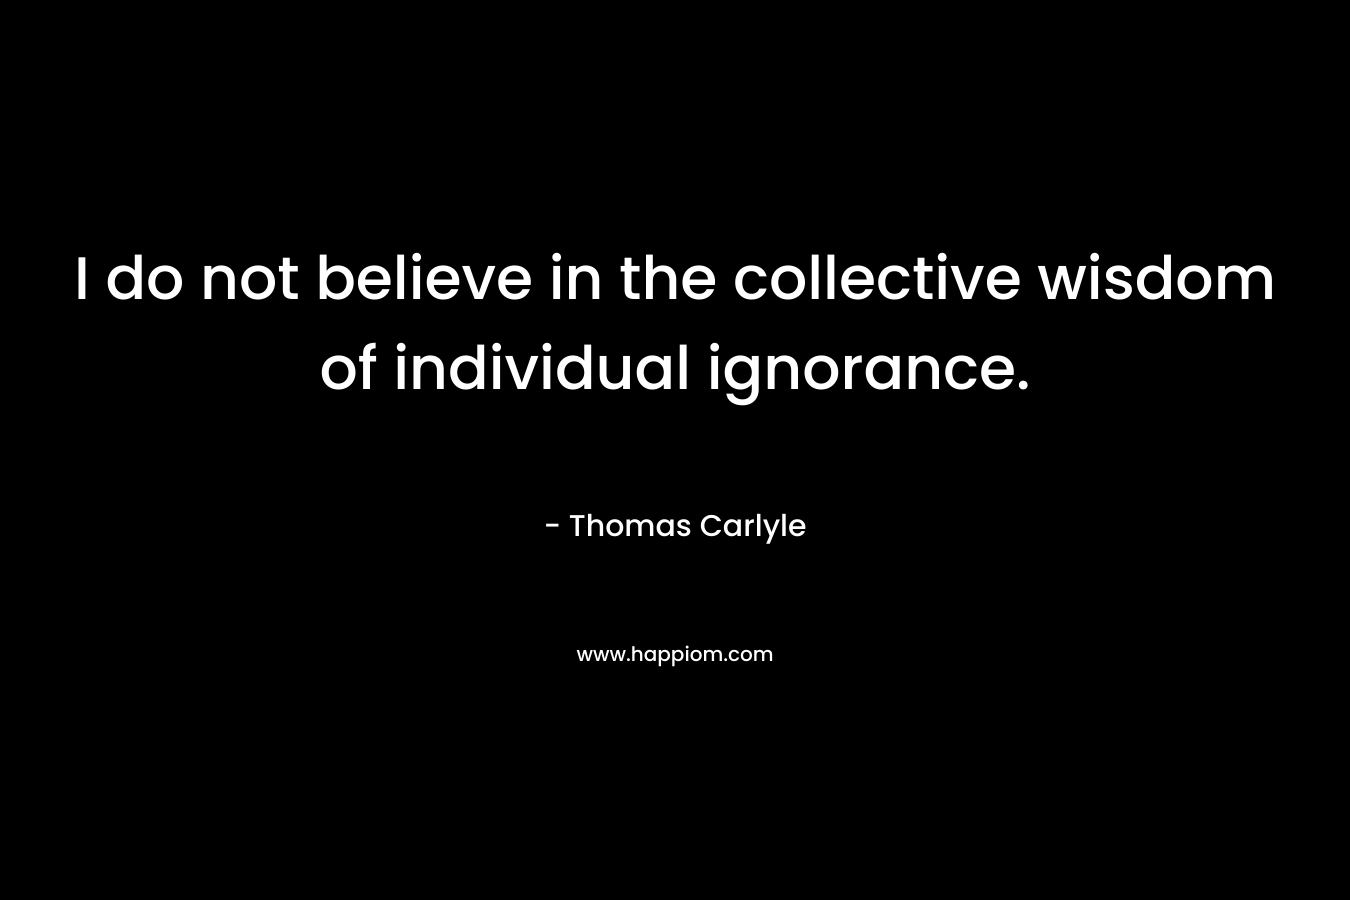 I do not believe in the collective wisdom of individual ignorance. – Thomas Carlyle